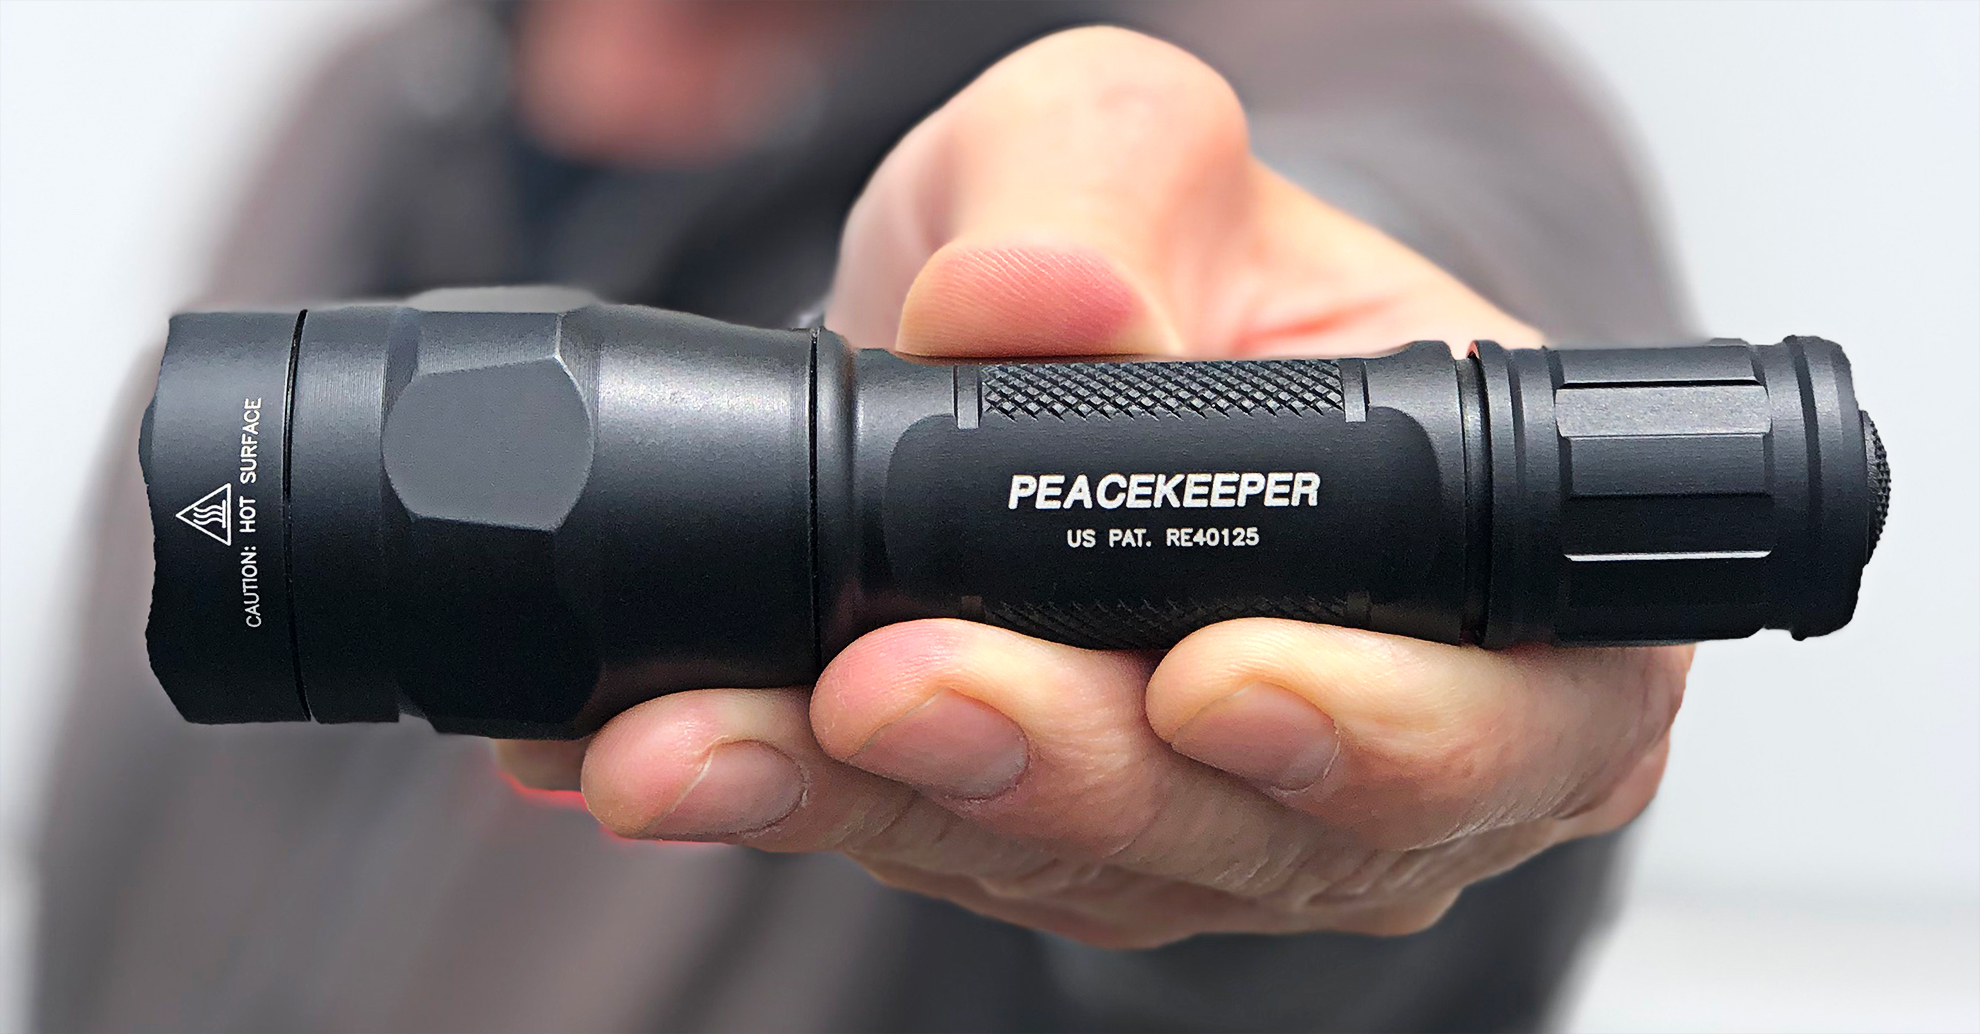 SureFire P1R Peacekeeper: The Lawman’s FlashlightDesigned by cops, available to anyone